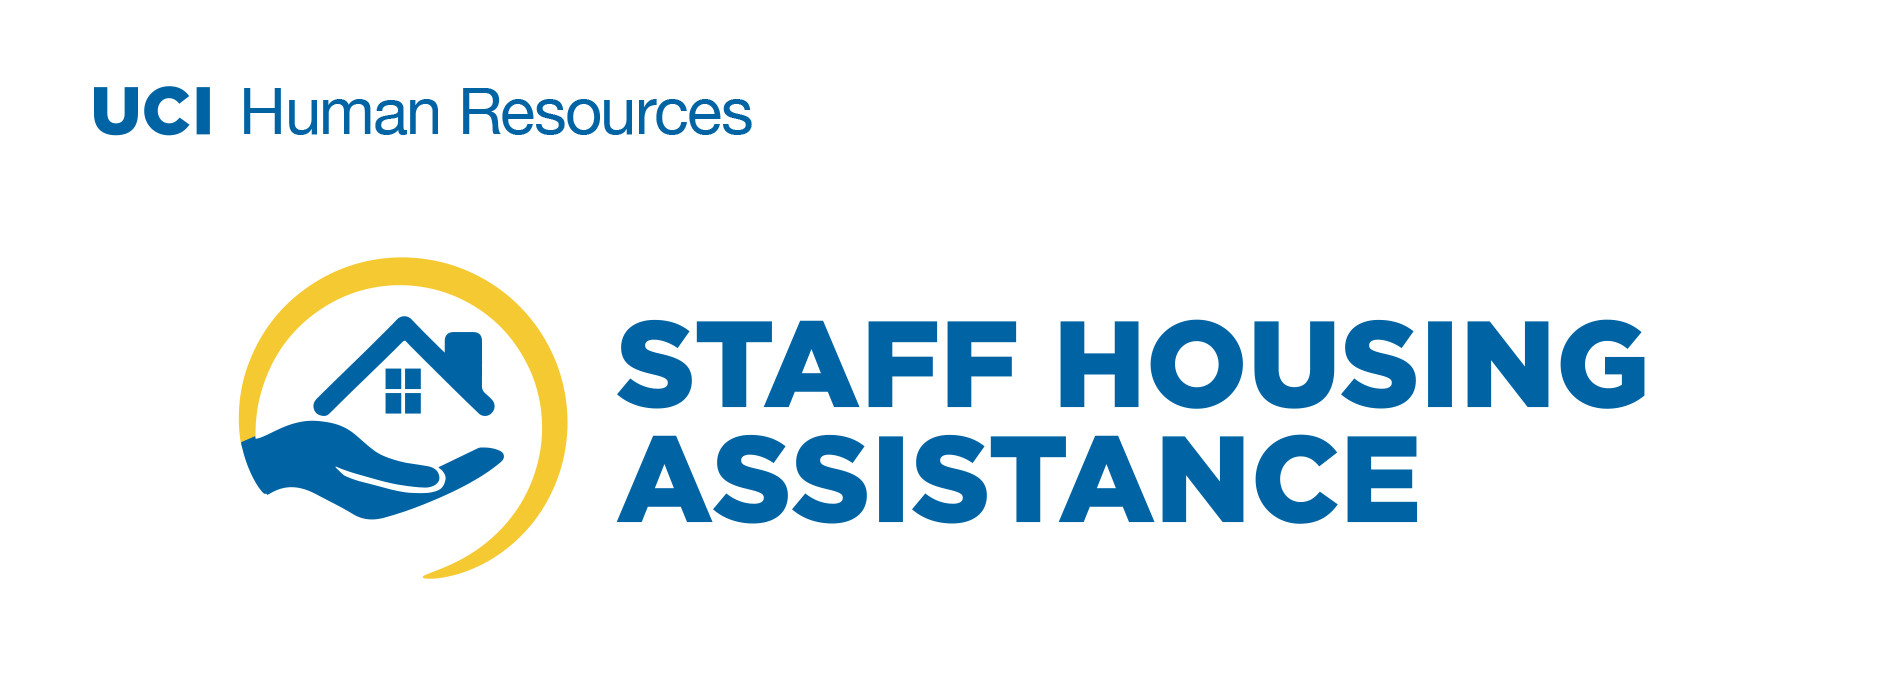 UCI Human Resources Staff Housing Assistance